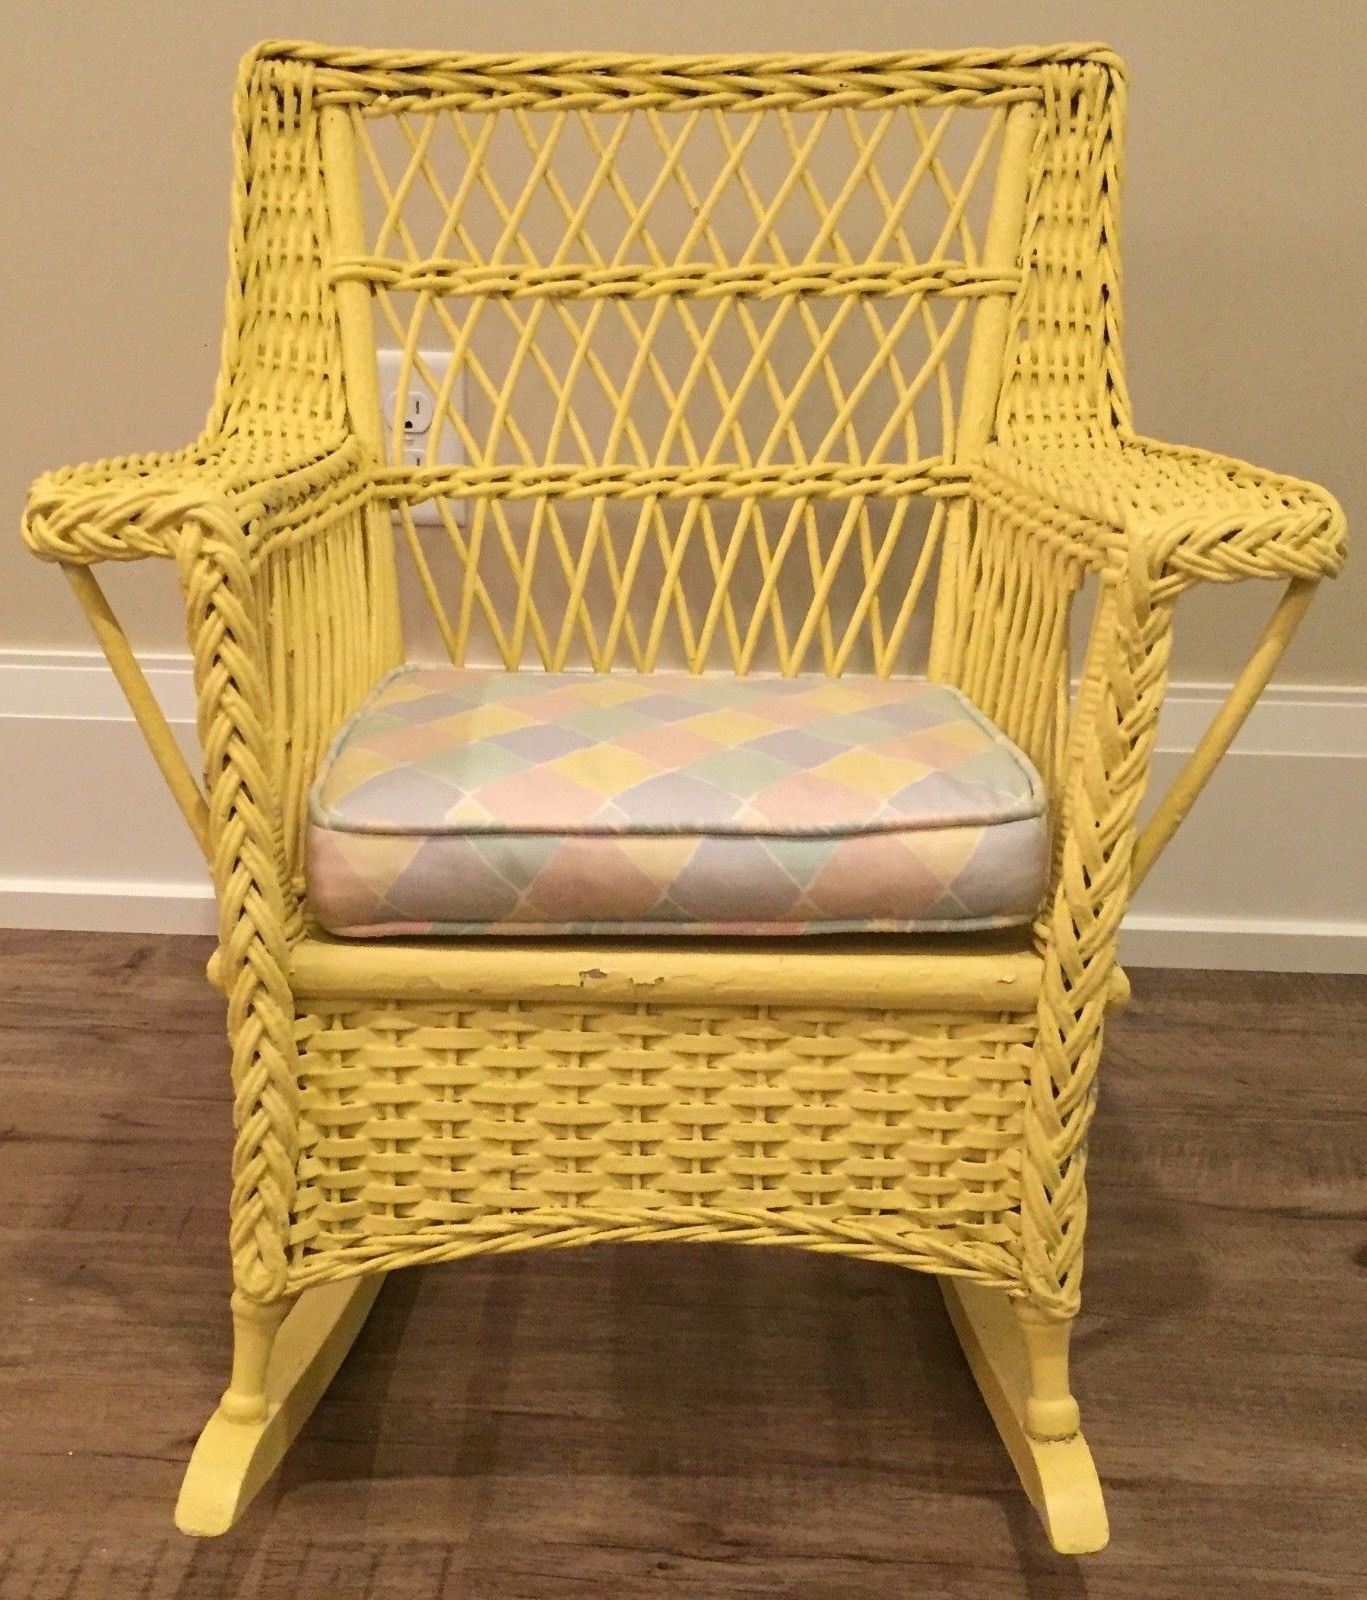 Antique Wicker Rocking Chairs Inside 2017 Antique Wicker Child's Rocker Rocking Chair 1930's Vintage Yellow Oh (View 15 of 15)